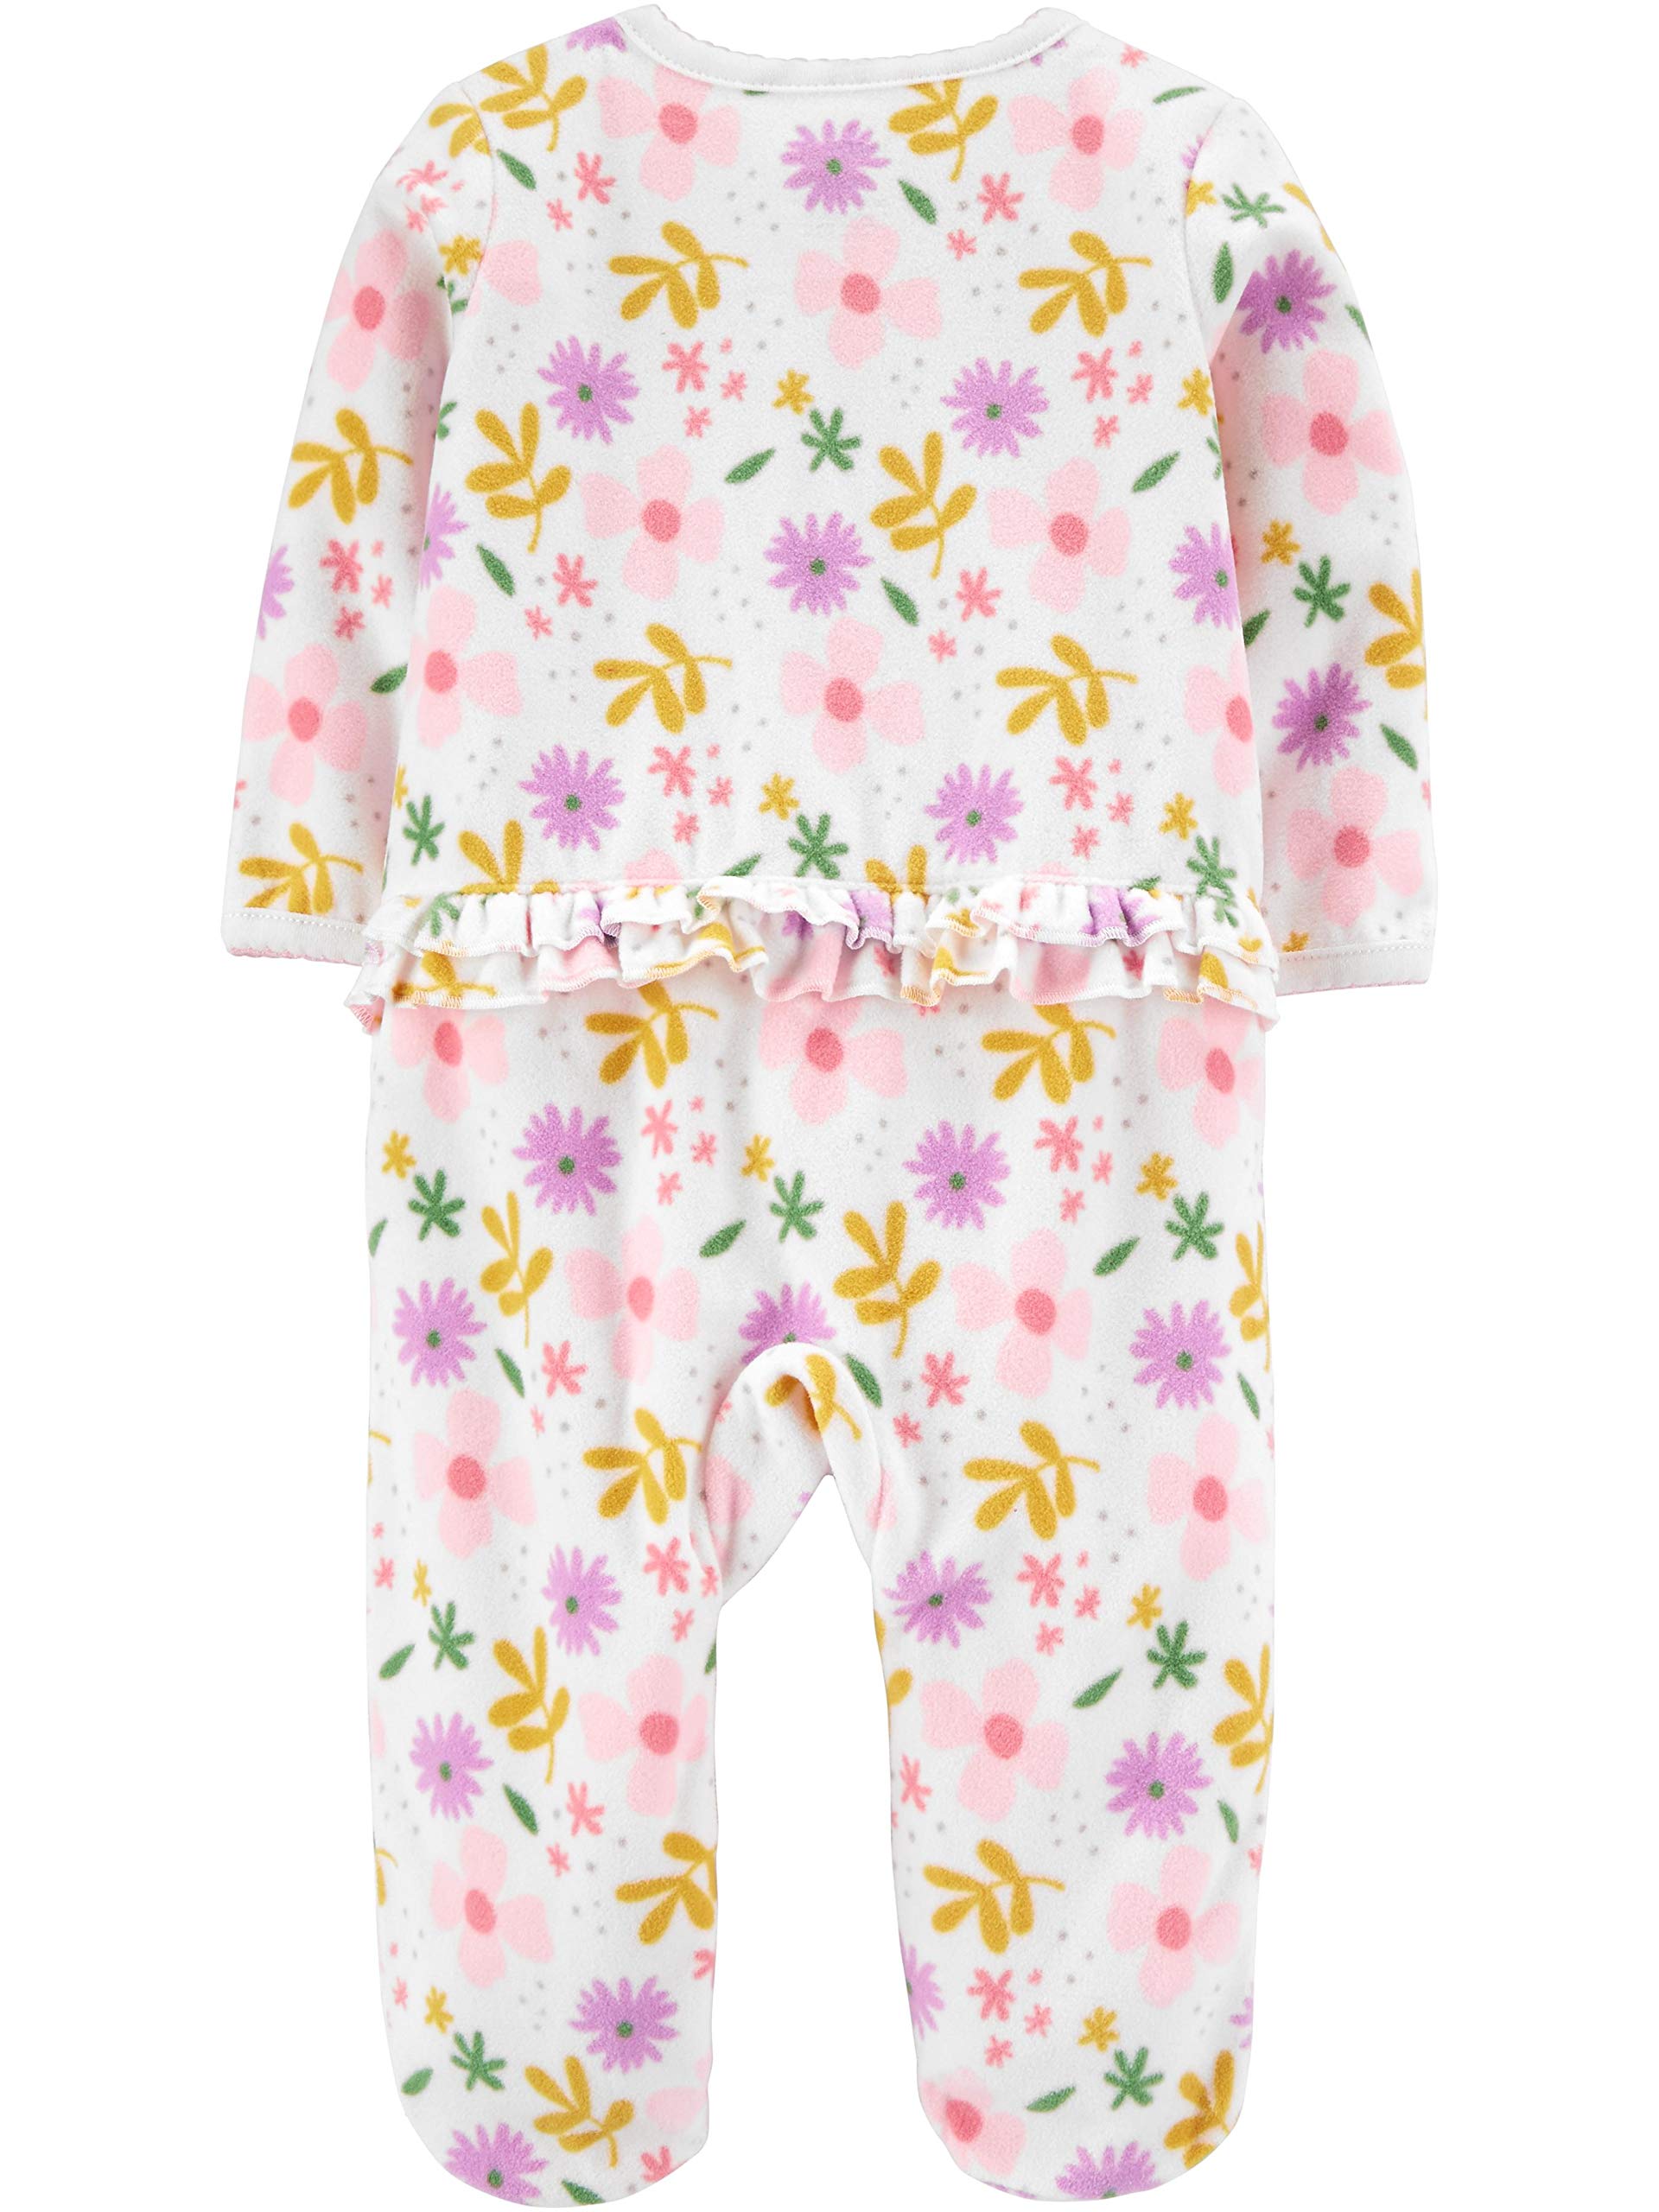 Simple Joys by Carter's Baby Girls' Fleece Footed Sleep and Play, Pack of 2